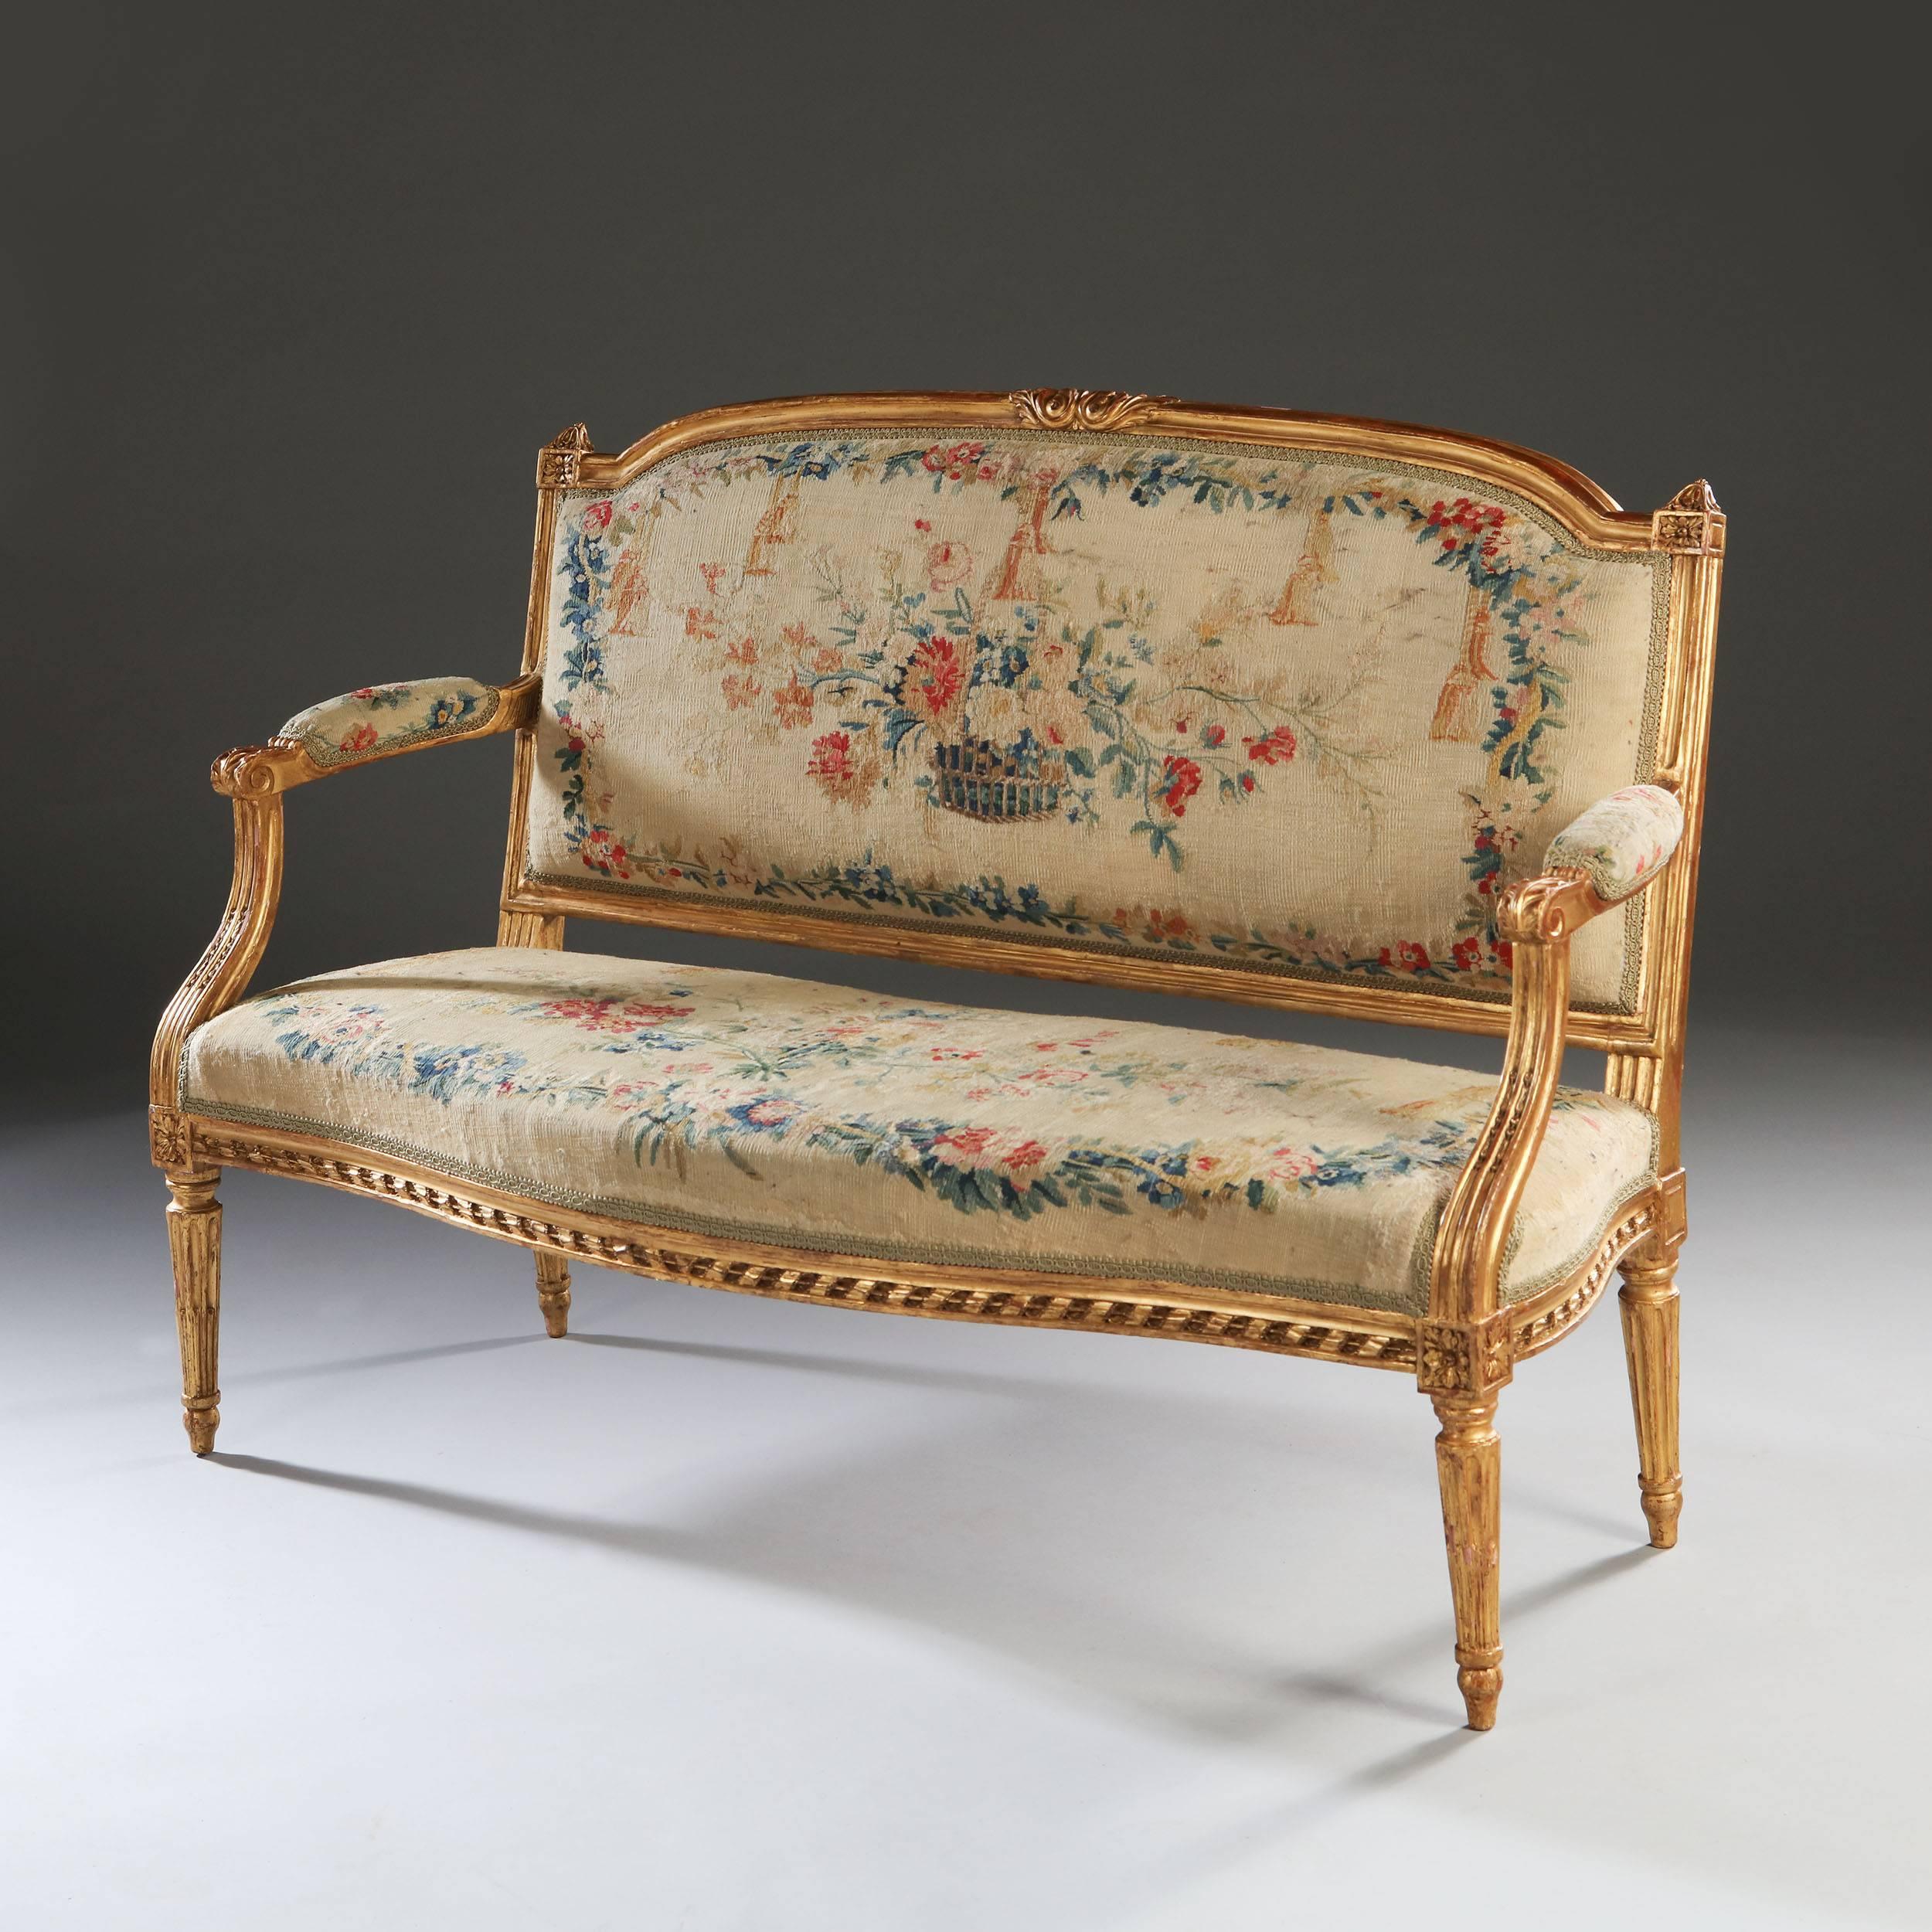 Pair 18th Century Neoclassical Louis XVI Marquise Chairs Stamped Pierre Laroque In Good Condition In London, by appointment only